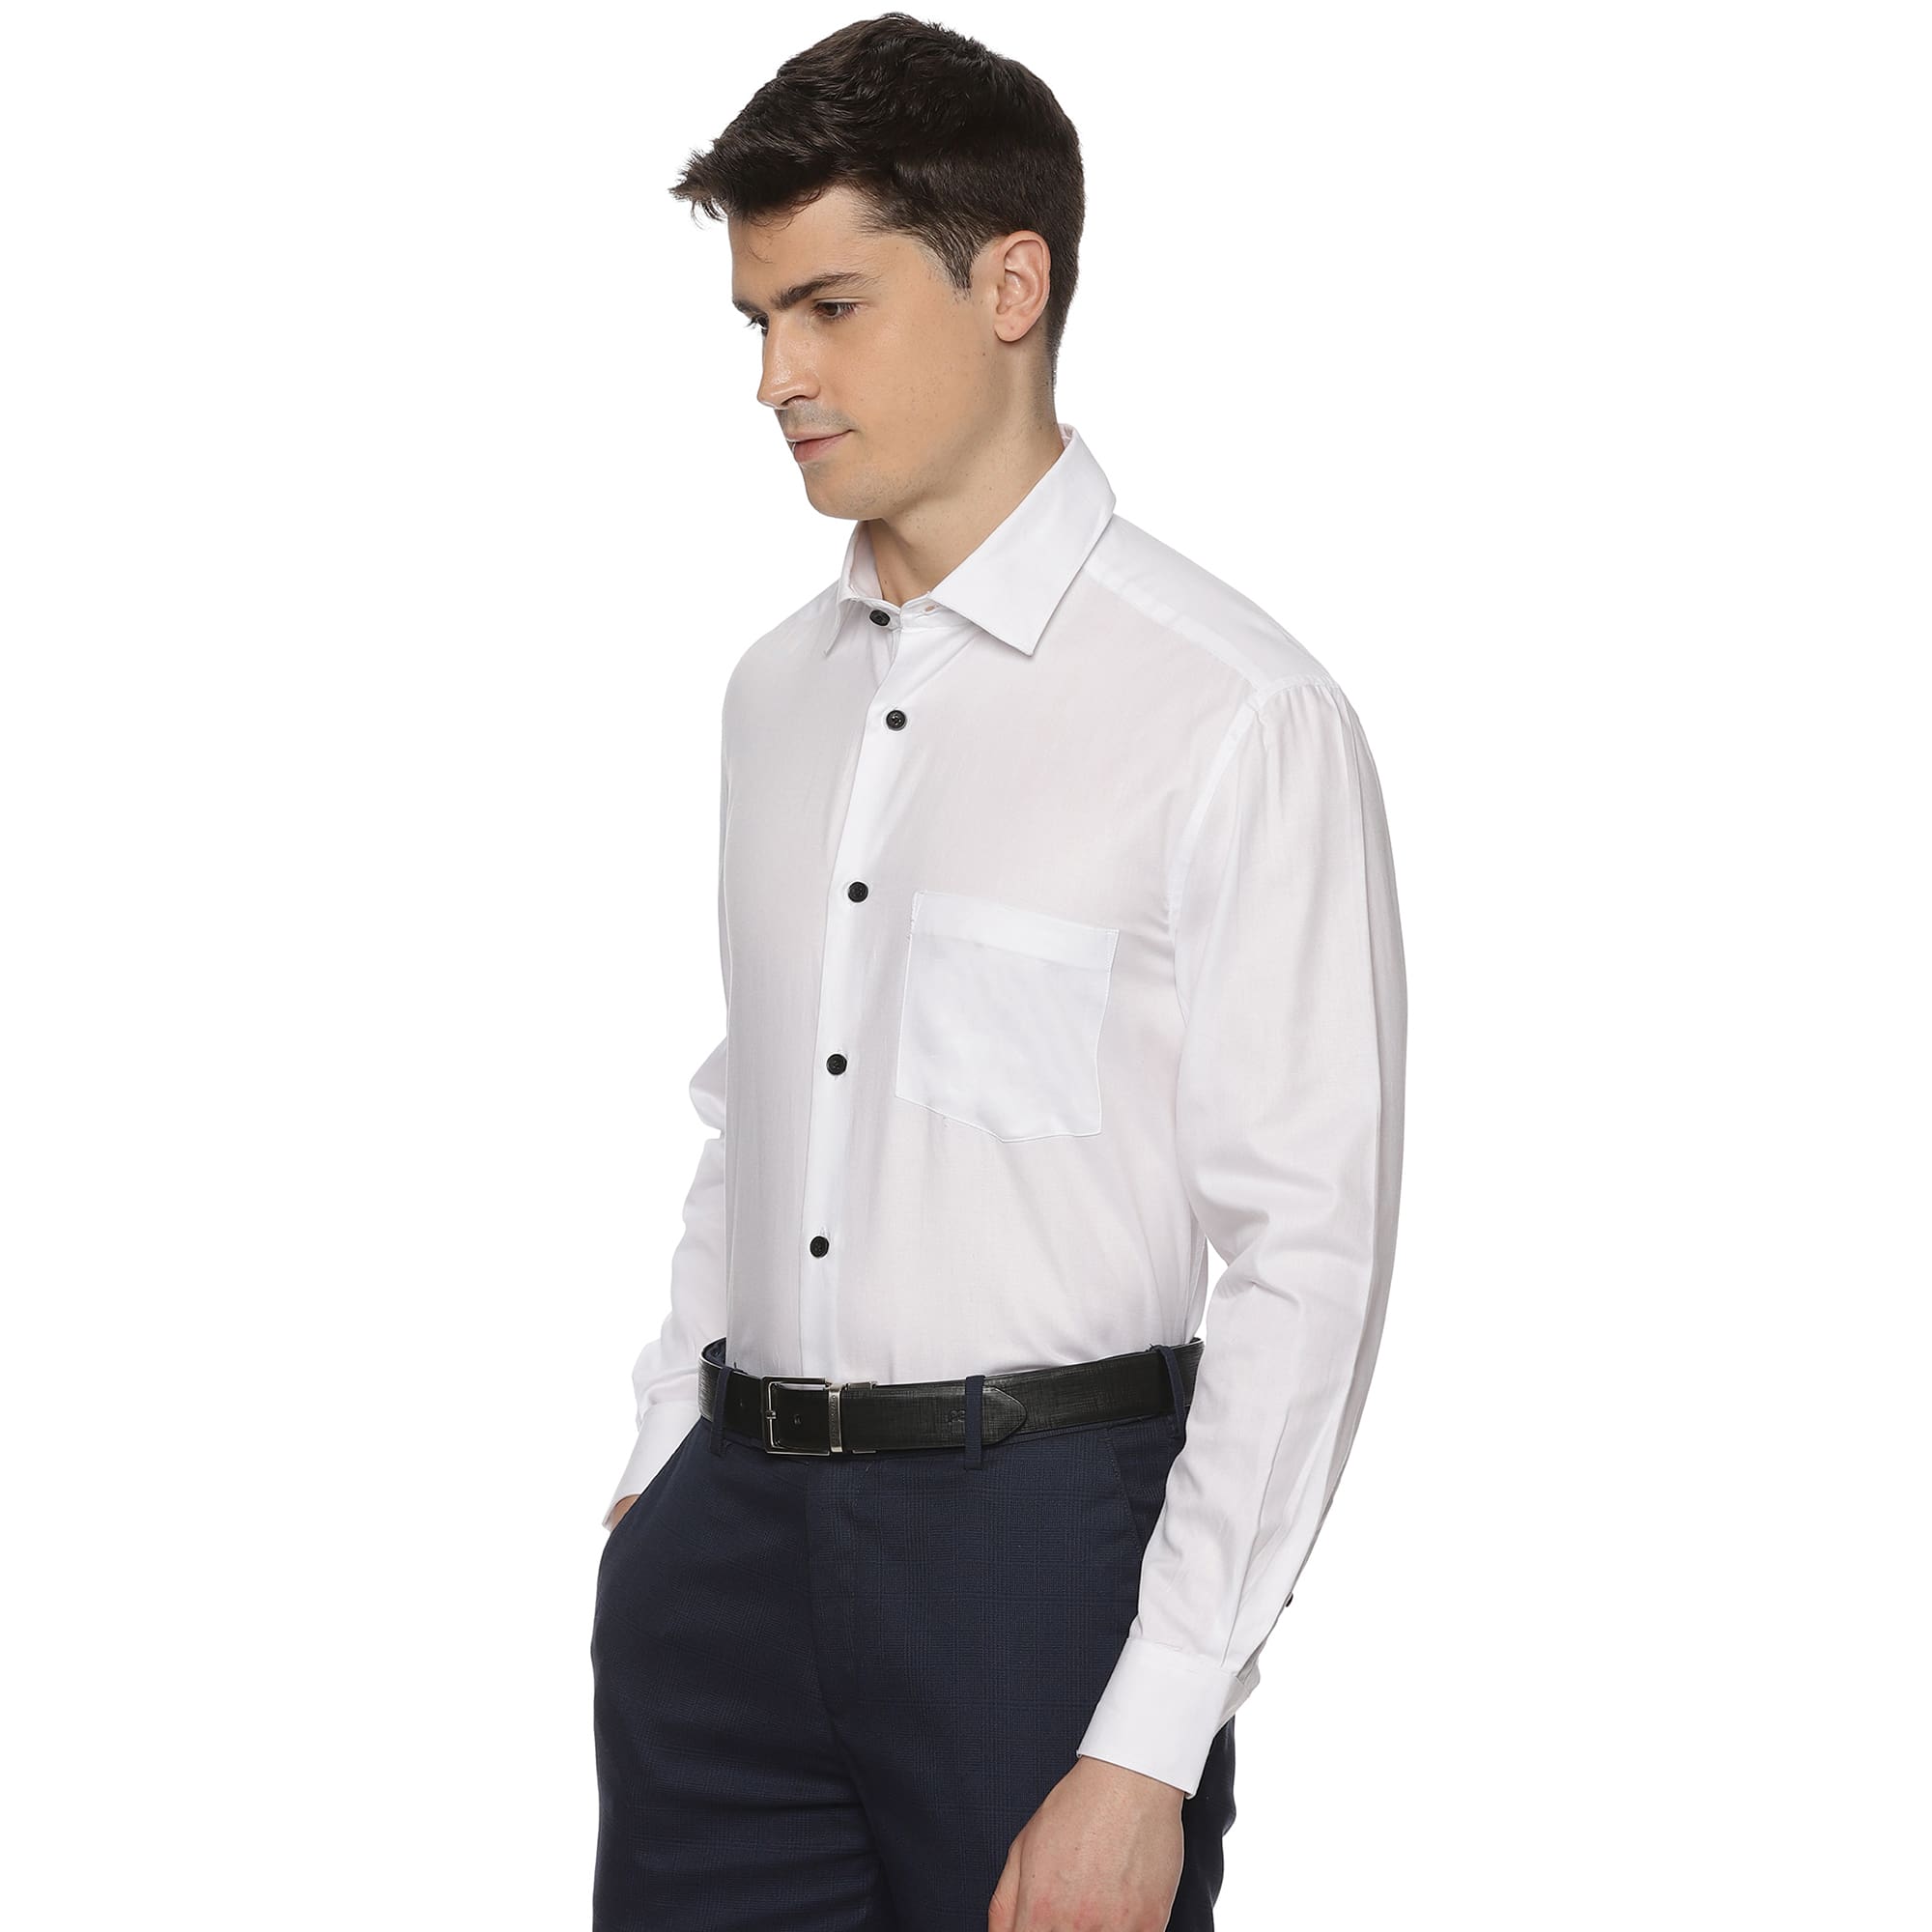 Eclipse Twill Solid Shirt In White Regular Fit - The Formal Club